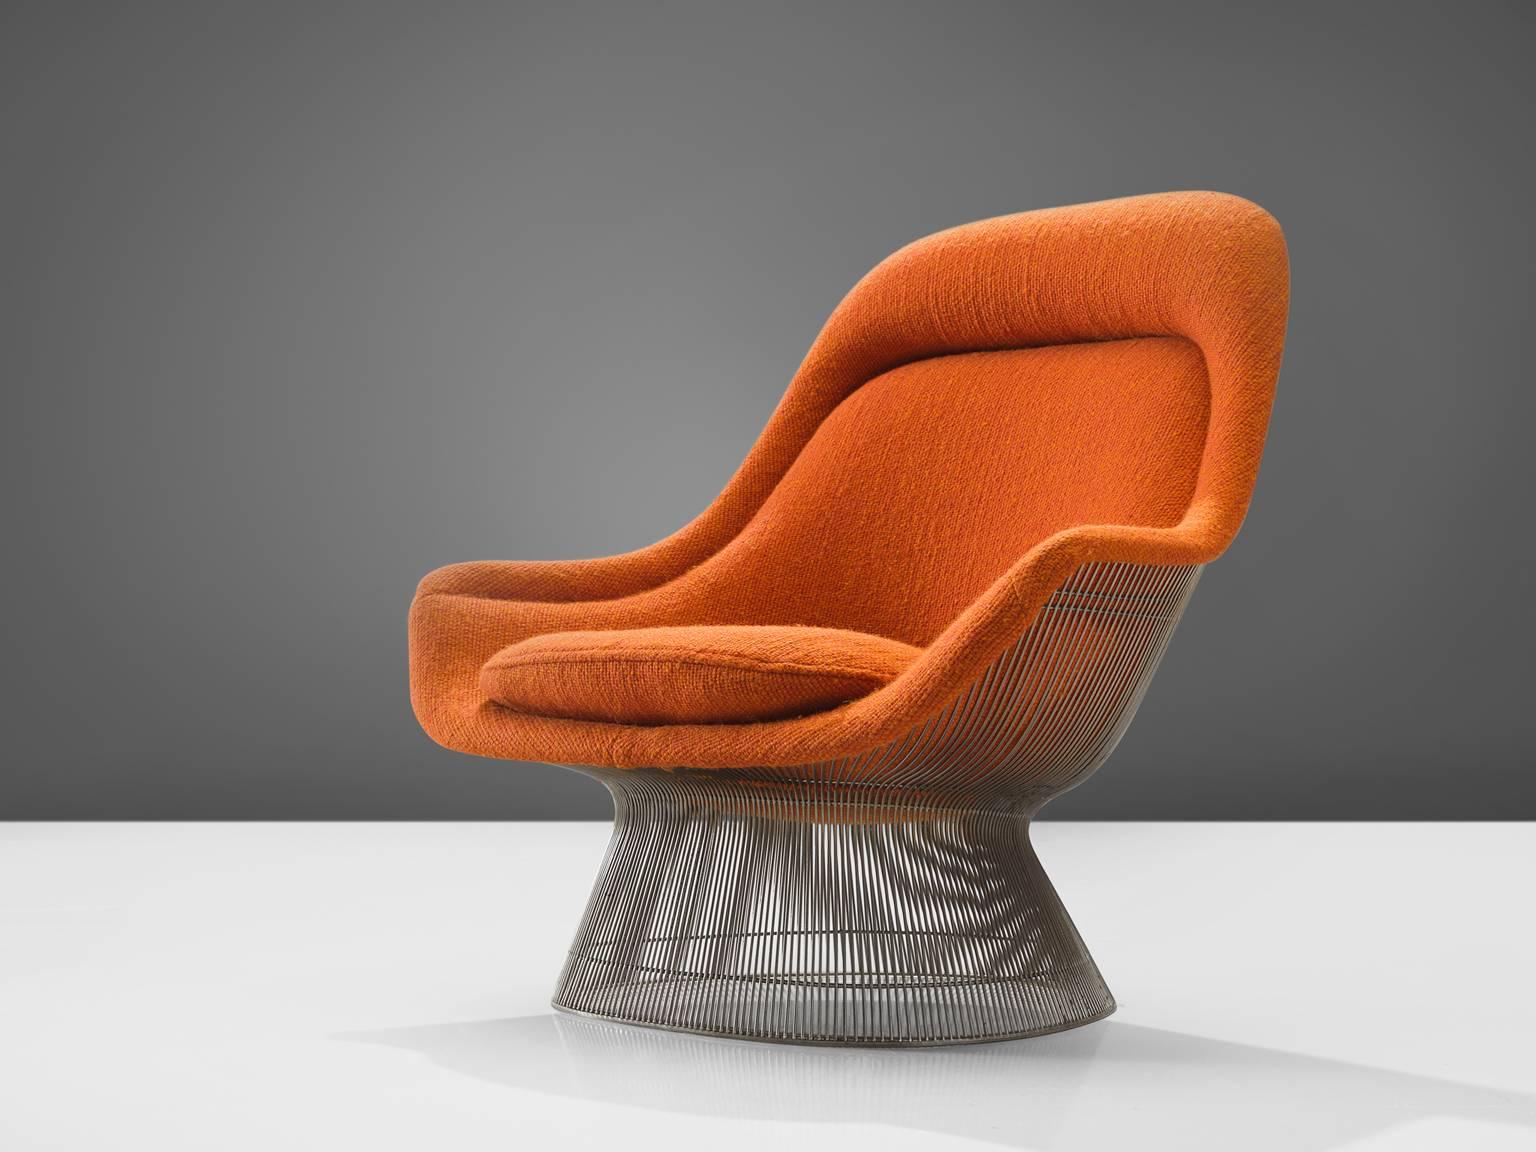 Warren Platner for Knoll, easy chair 'model 1705', nickelled steel and original orange fabric, United States, design 1966, production later

This iconic orange easy chair by Warren Platner is created by welding curved steel rods to circular and